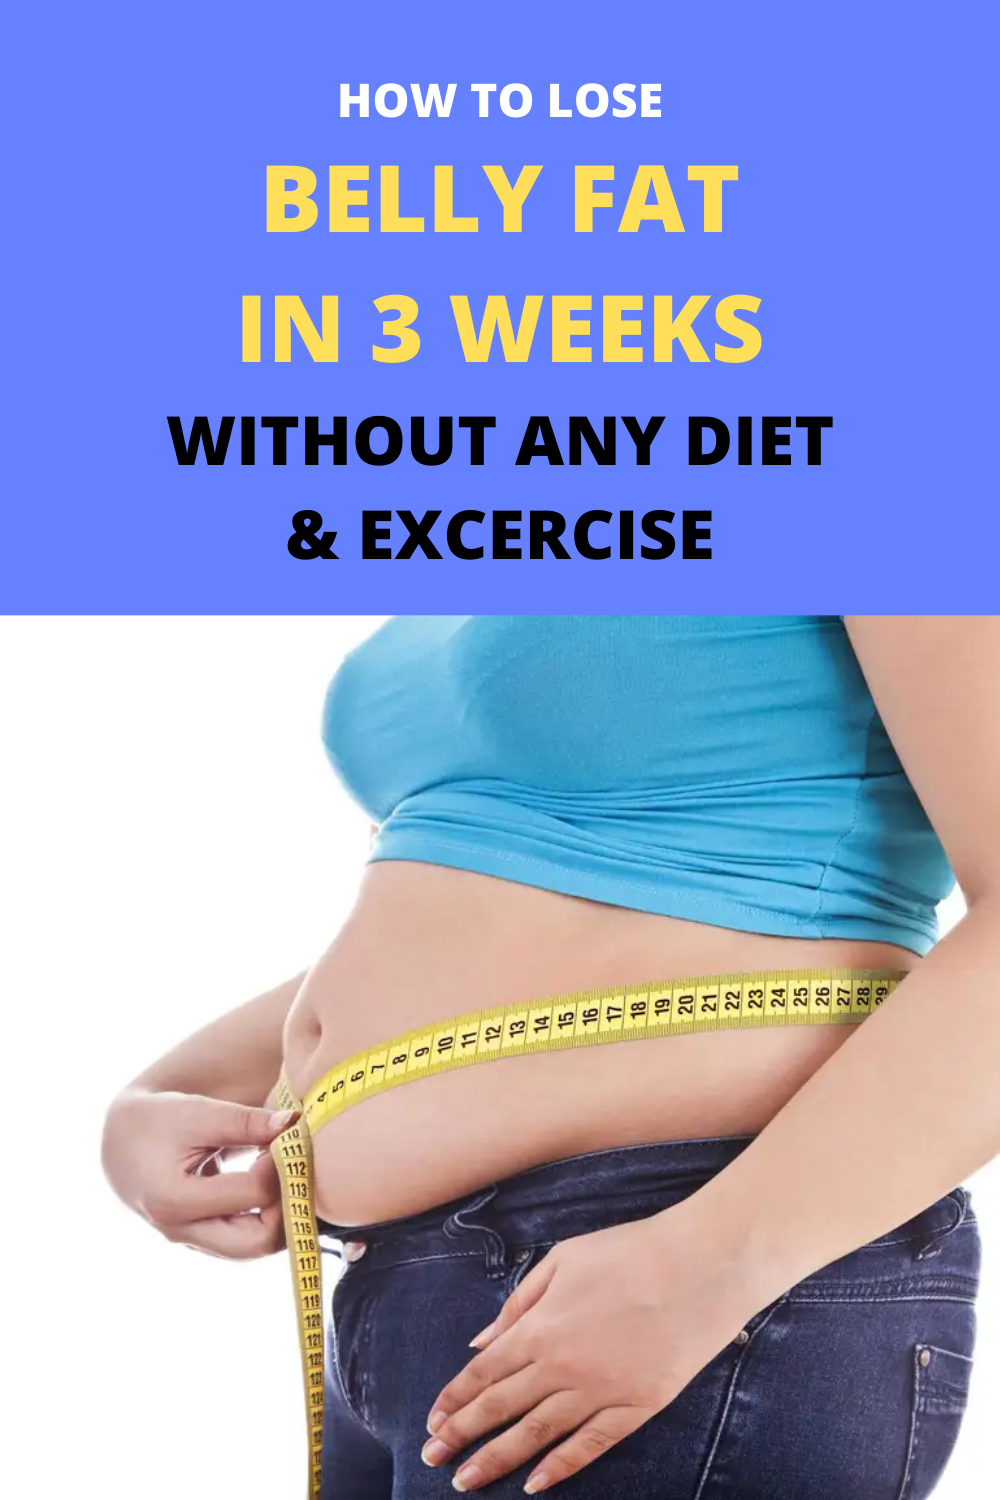 Marie Levato HOW TO LOSE BELLY FAT IN 3 WEEKS WITHOUT ANY